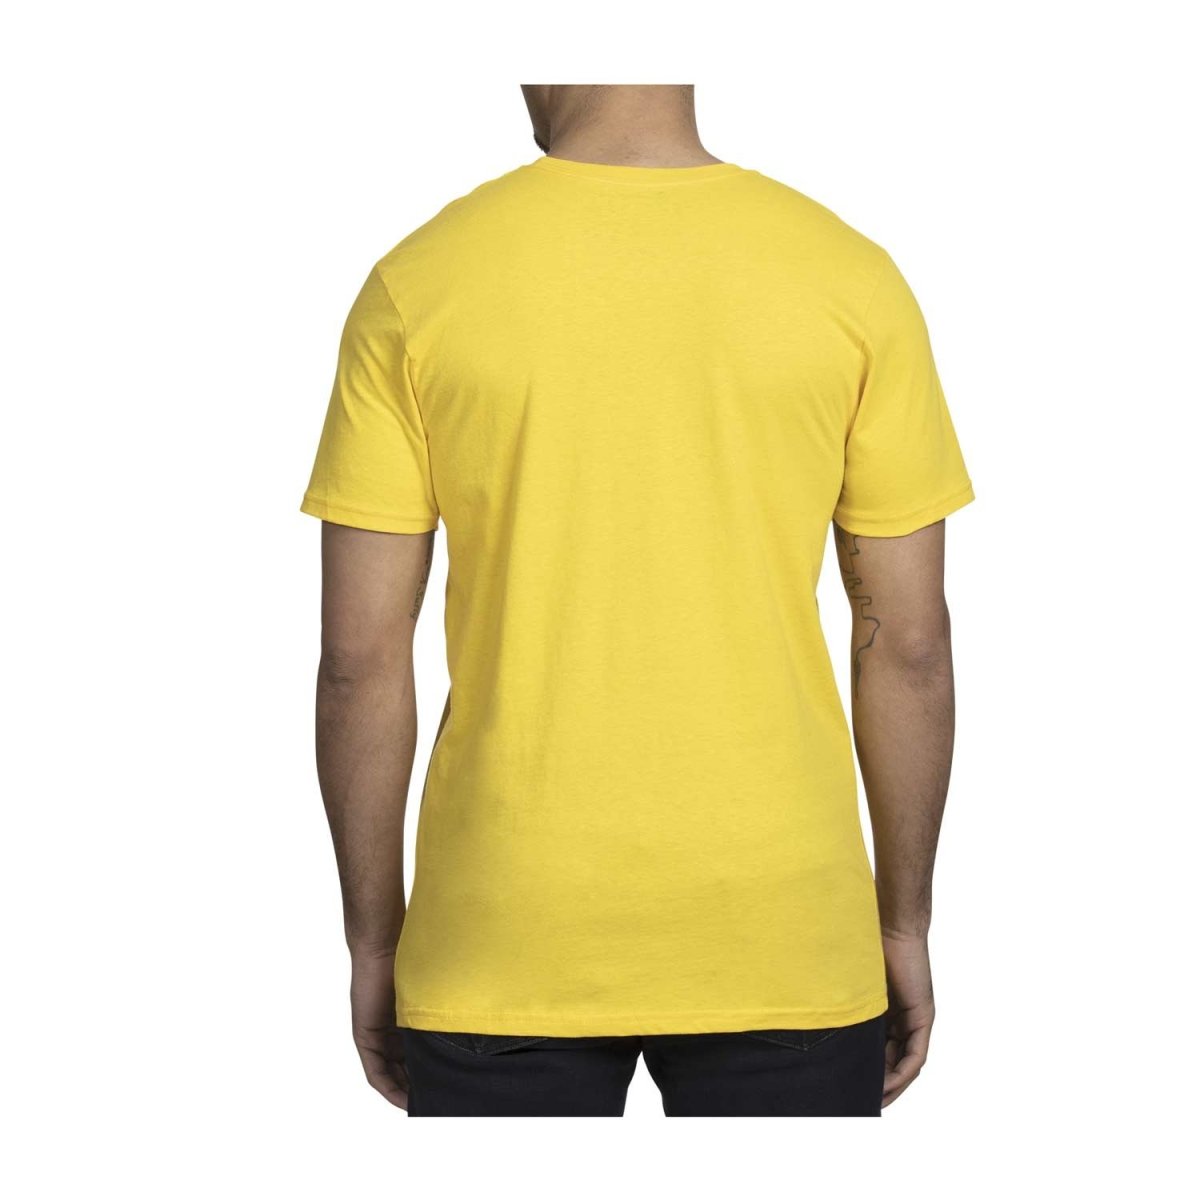 Pikachu & Silhouettes Yellow Relaxed Fit Crew Neck T-Shirt - Men ...